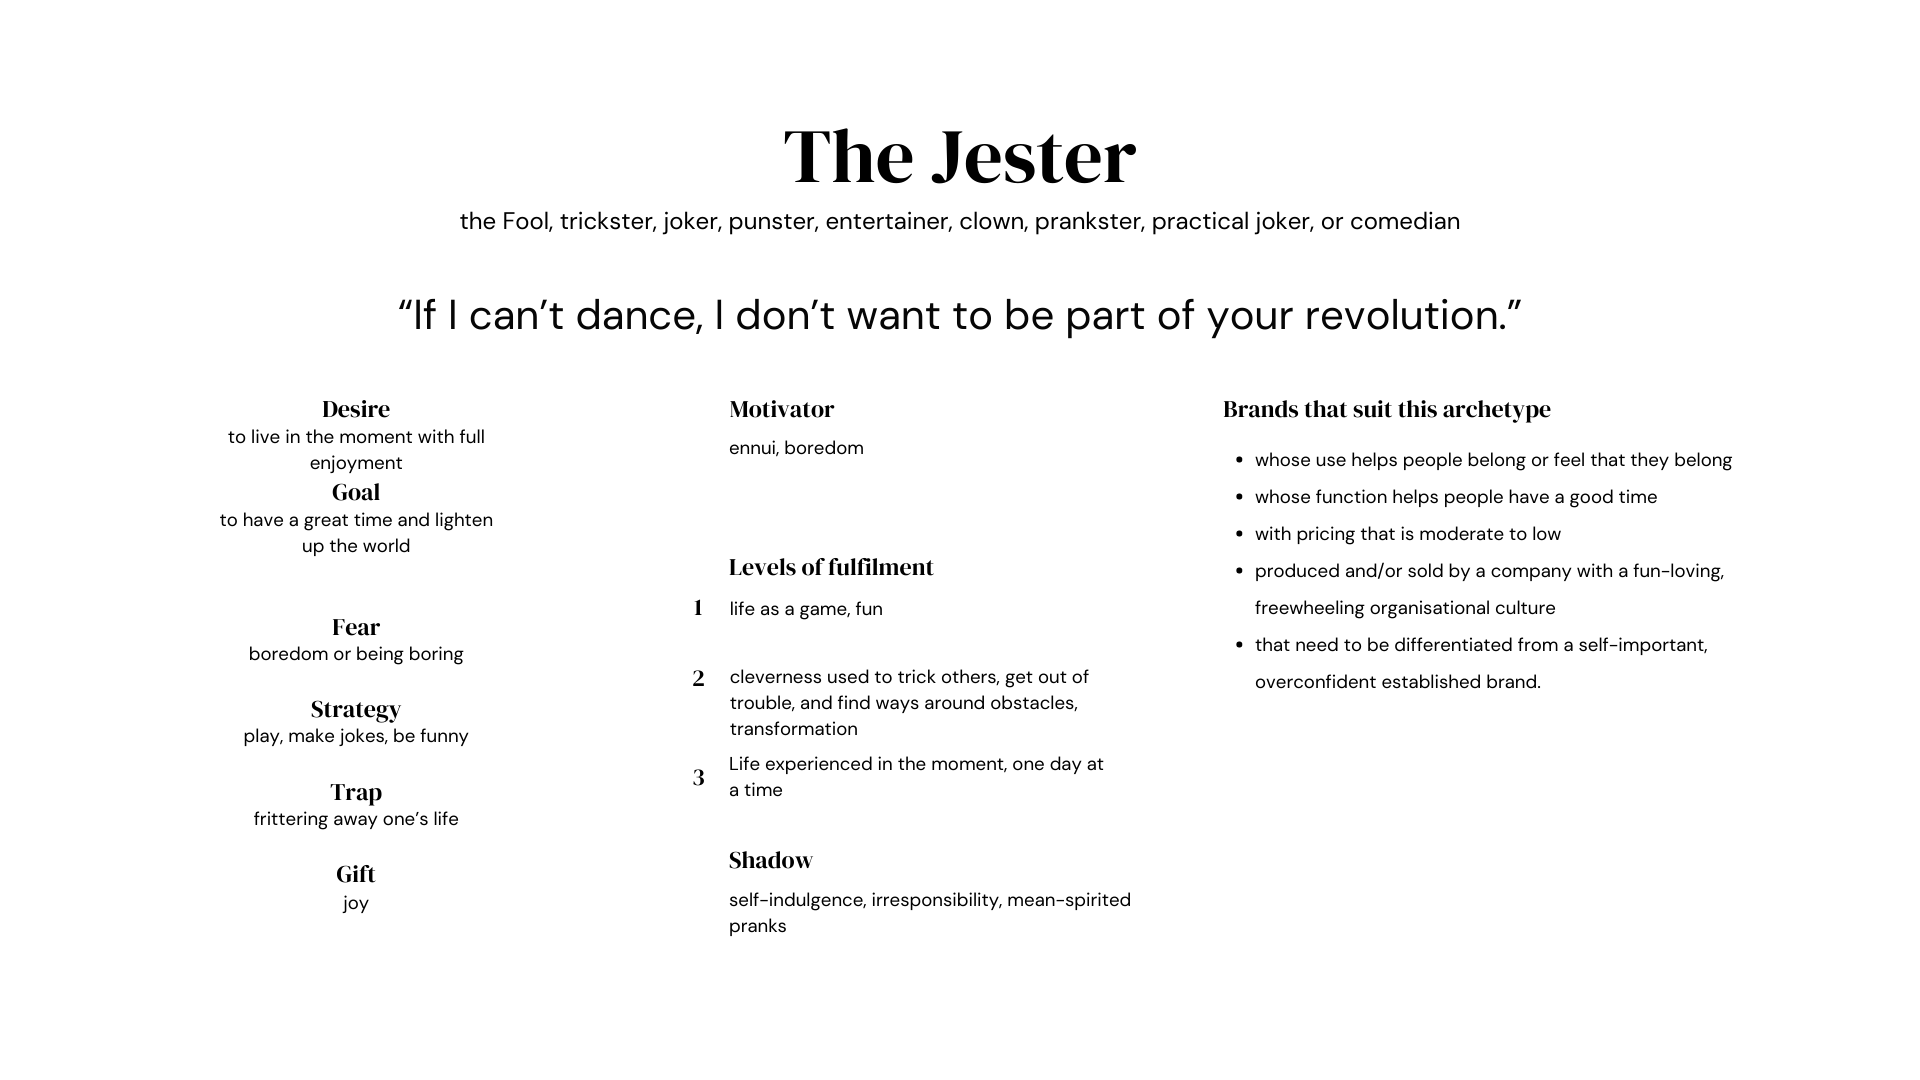 The Jester.